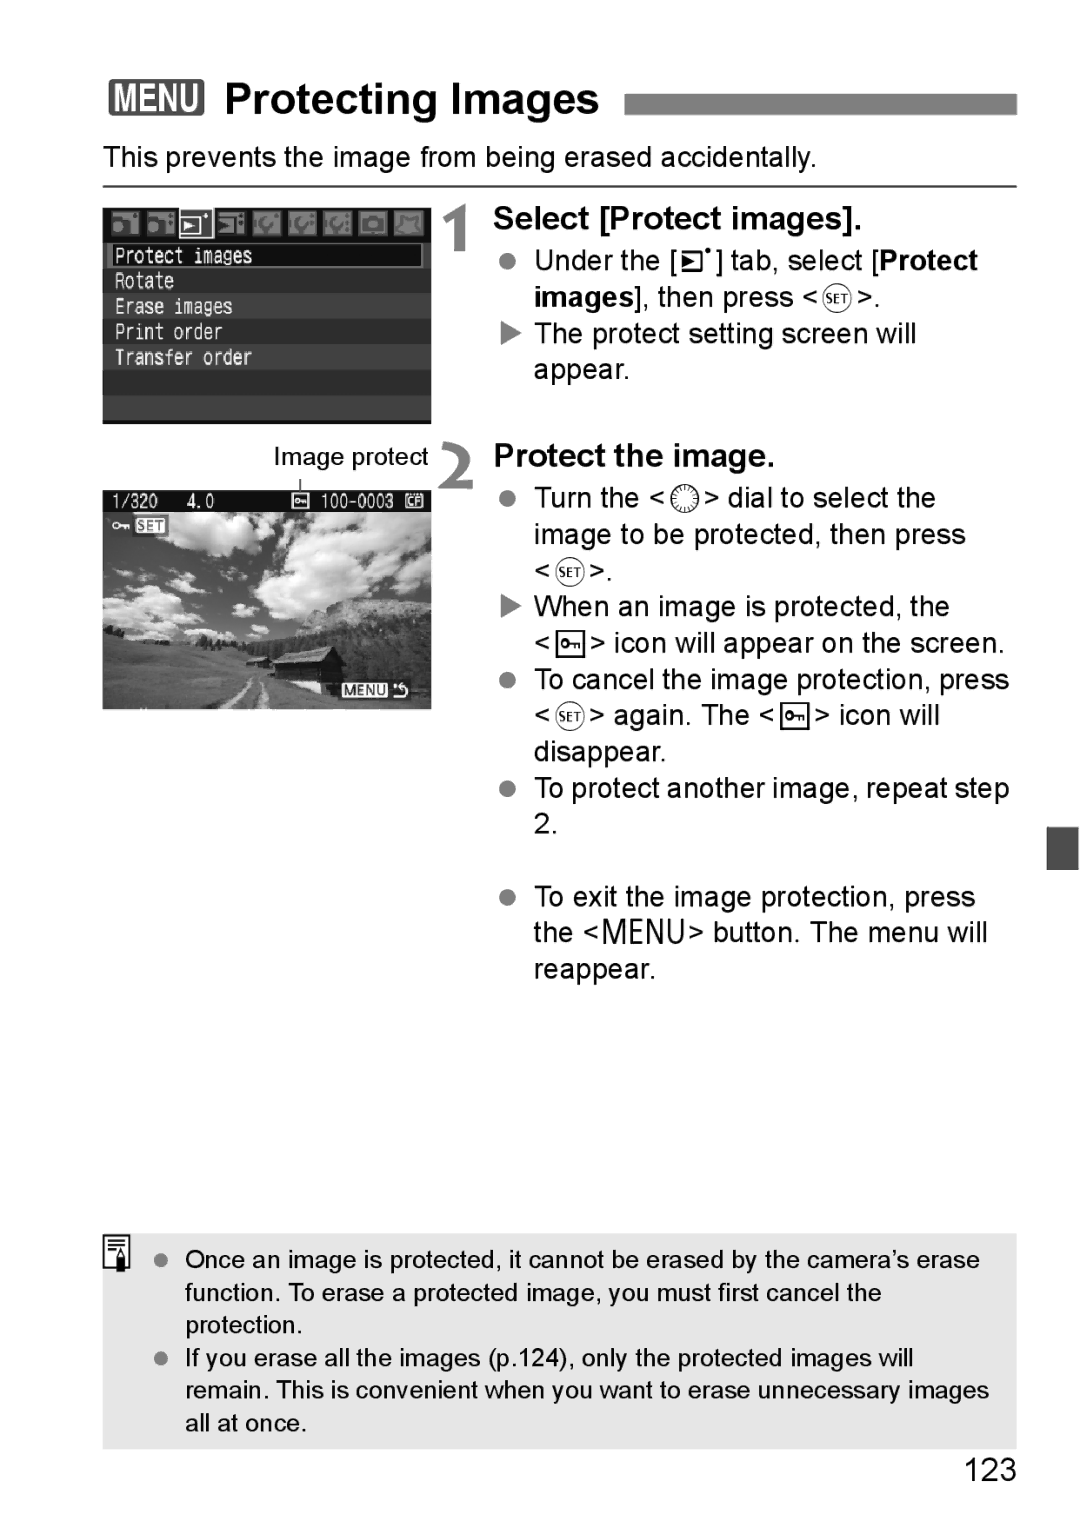 Canon EOS40D instruction manual 3Protecting Images, Select Protect images, Protect the image, 123 